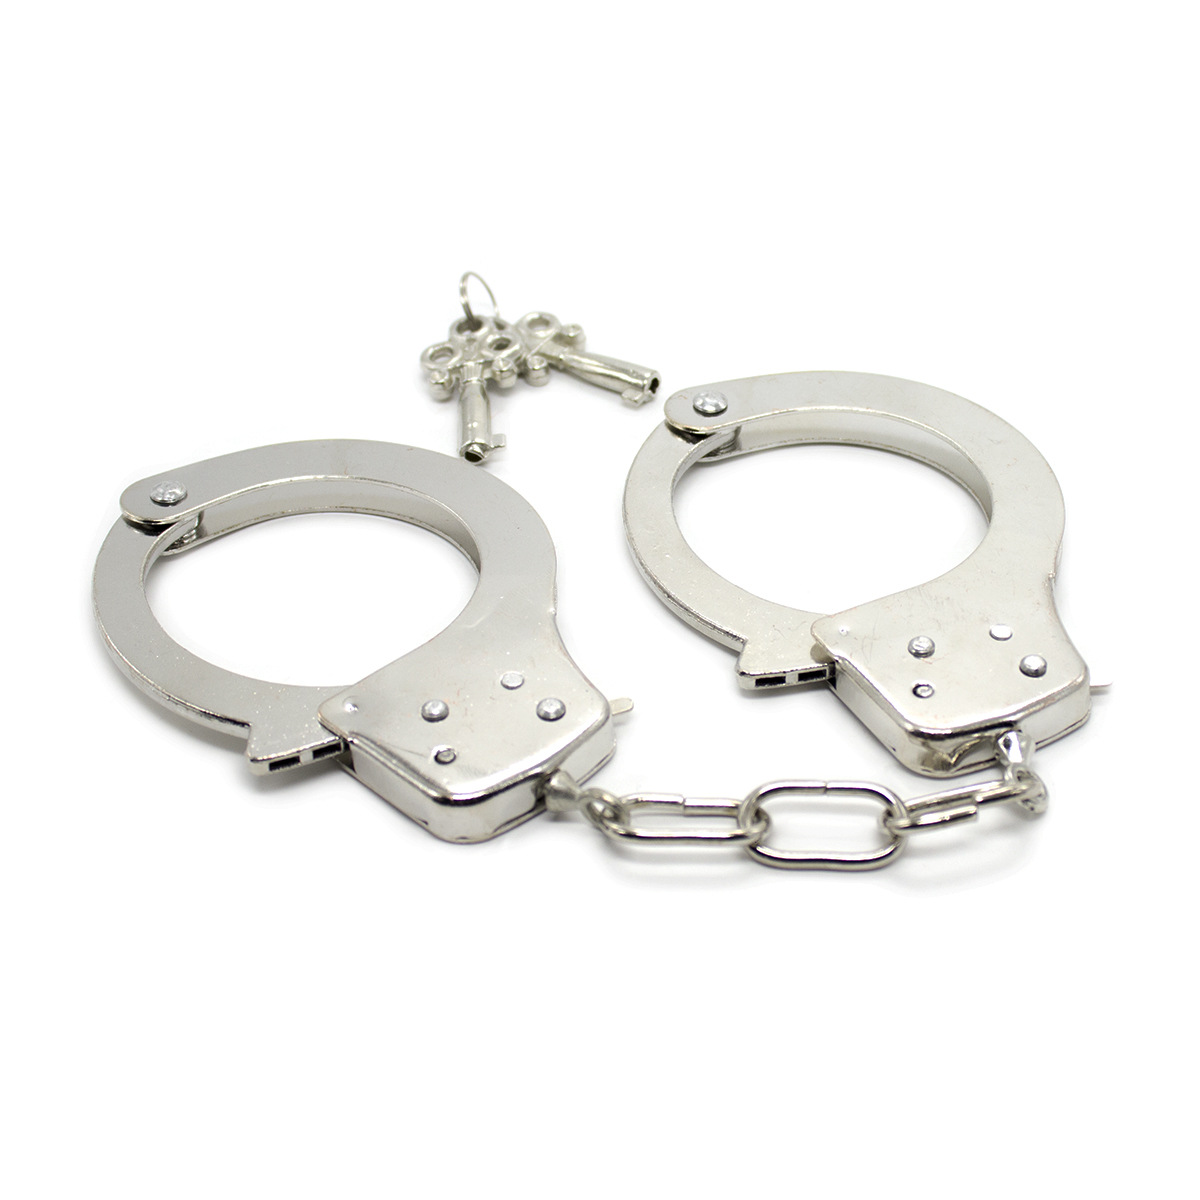 Plus Metal Handcuffs - Click Image to Close